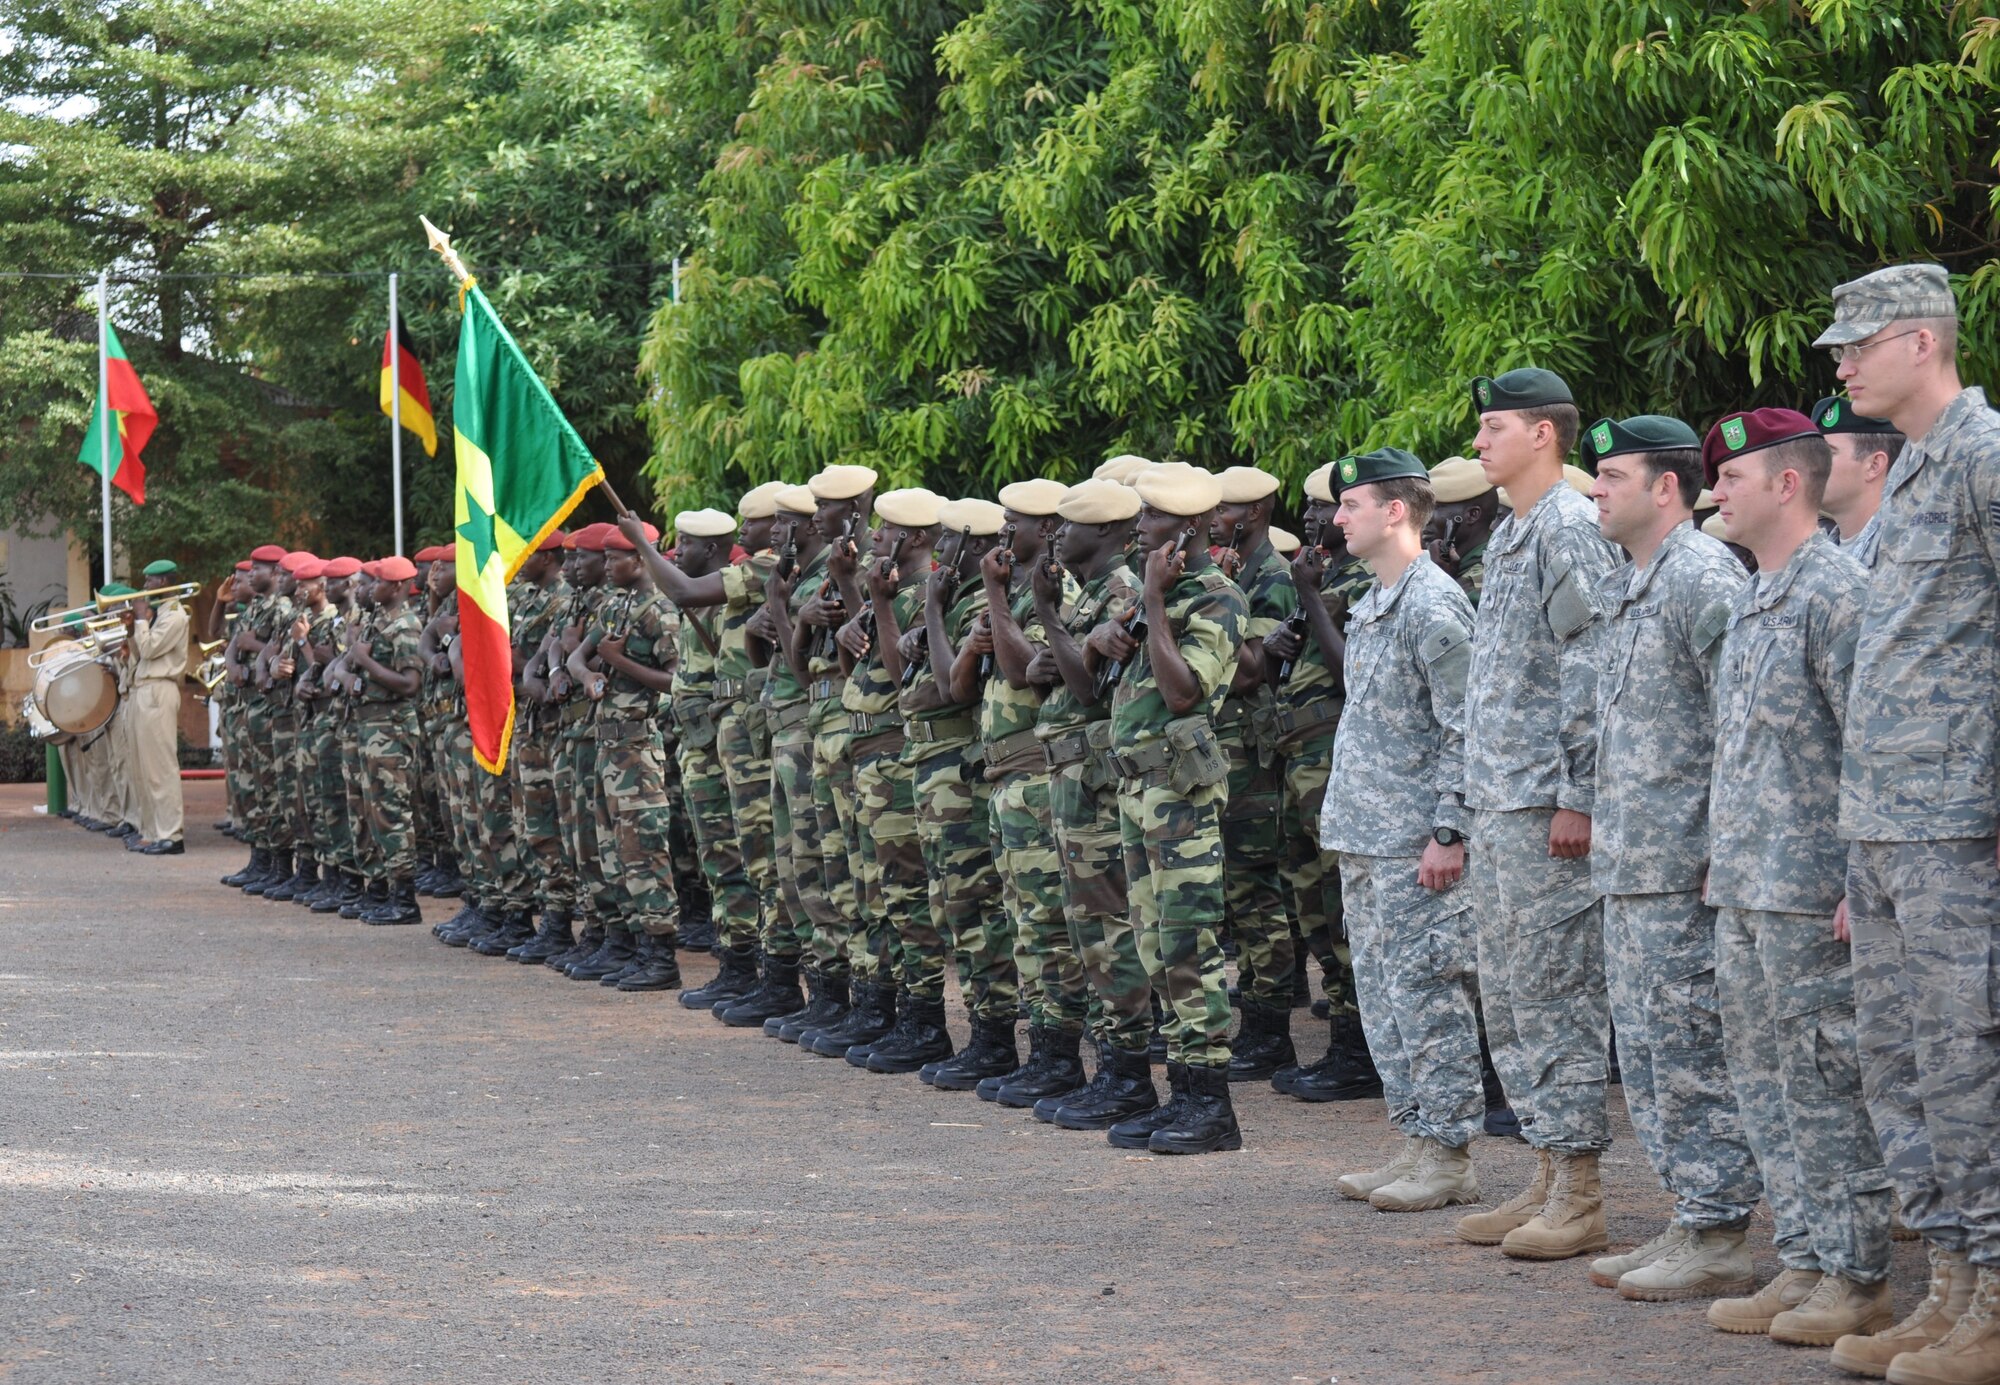 BAMAKO, Mali – Members of the 352nd Special Operations Group, RAF Mildenhall, United Kingdom, stand in formation with members of the Republic od Mali and U.S. Army forces at the opening ceremony for Exercise Flintlock 10, held here, May 3.  Flintlock 10 is an annual exercise aimed at strengthening security and stability in the Trans-Saharan area.  About 1,200 European, African Partner Nation and U.S. participants from 14 nations are involved in military interoperability activities across the Trans-Saharan region during this event.  The exercise runs through May 23.  (U.S. Air Force photo/Tech. Sgt. Marelise Wood)